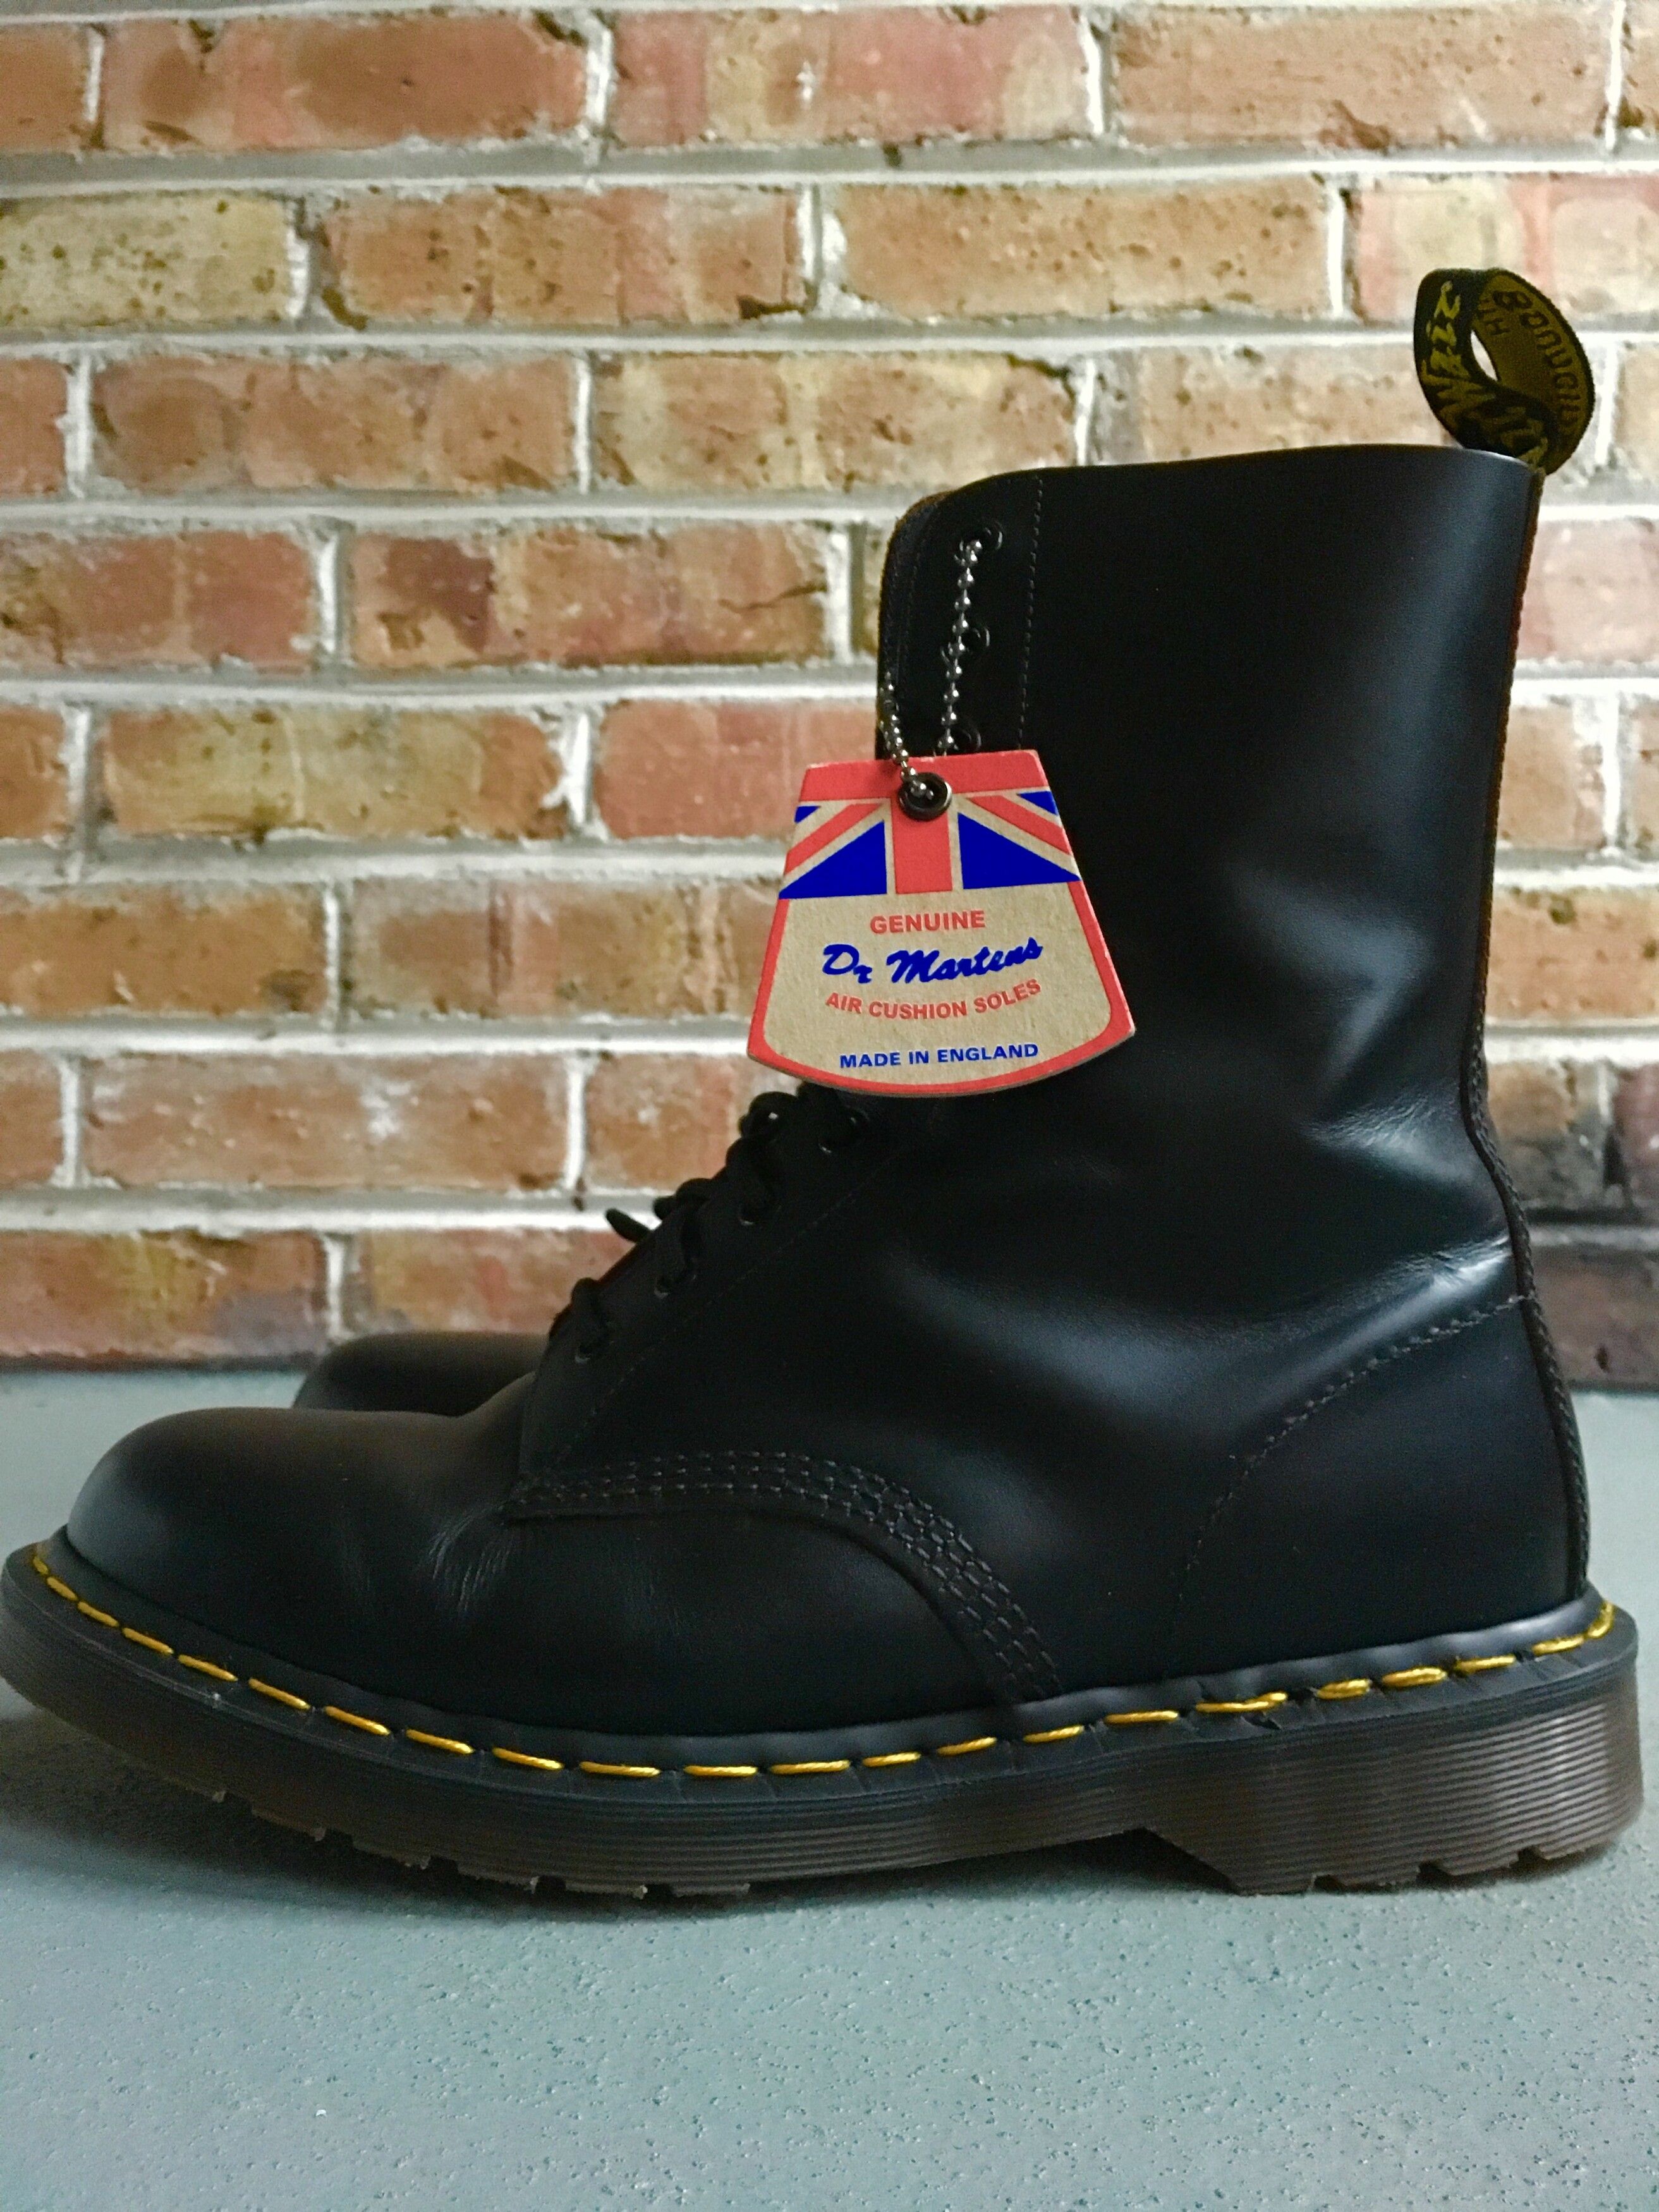 Dr. Martens 1490 Vintage Made in England Size US 10 / EU 43 - 2 Preview